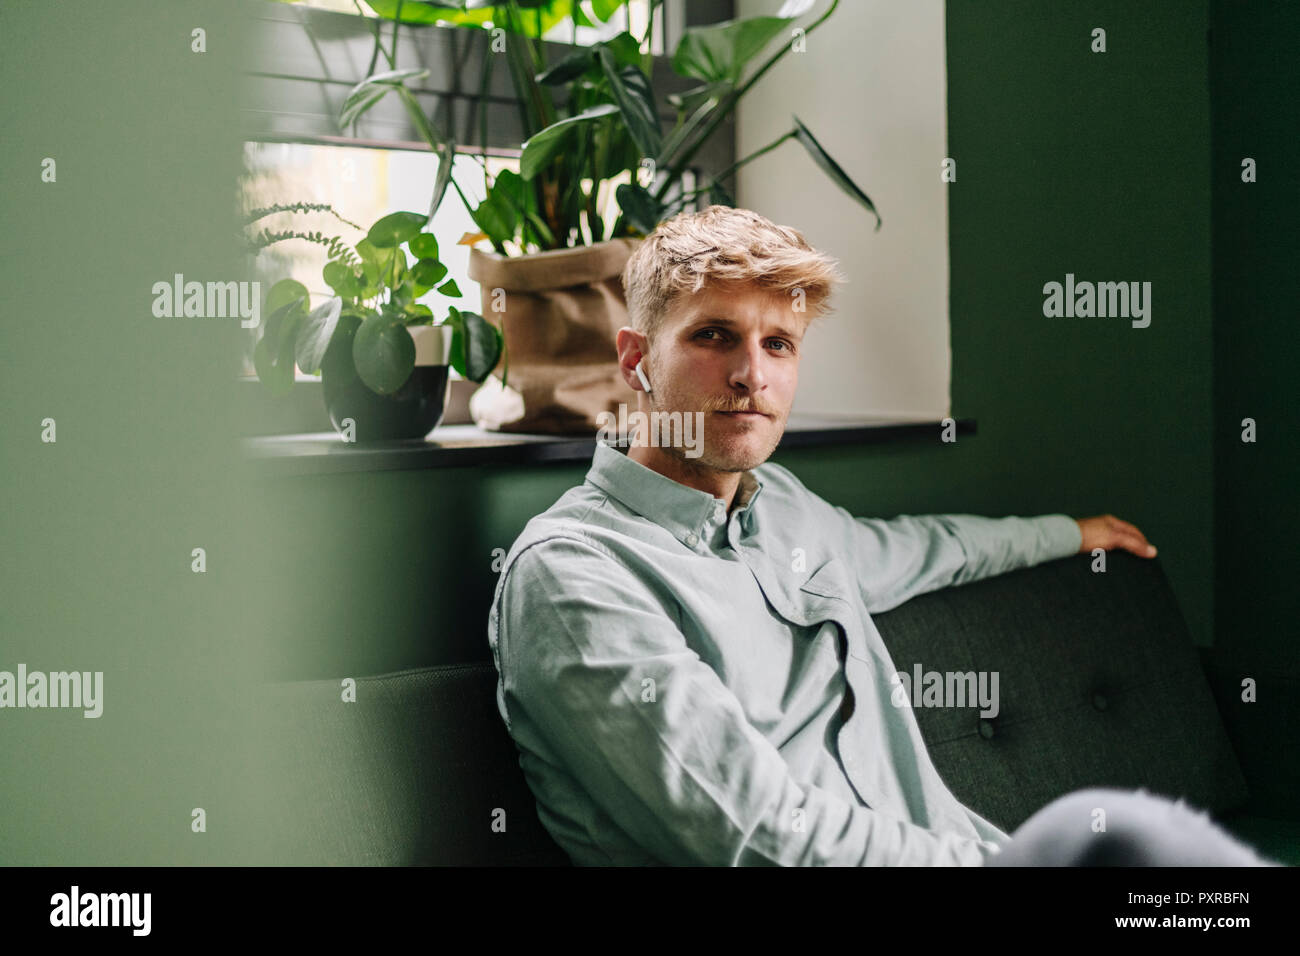 Young man sitting on green couch, using ear buds Stock Photo